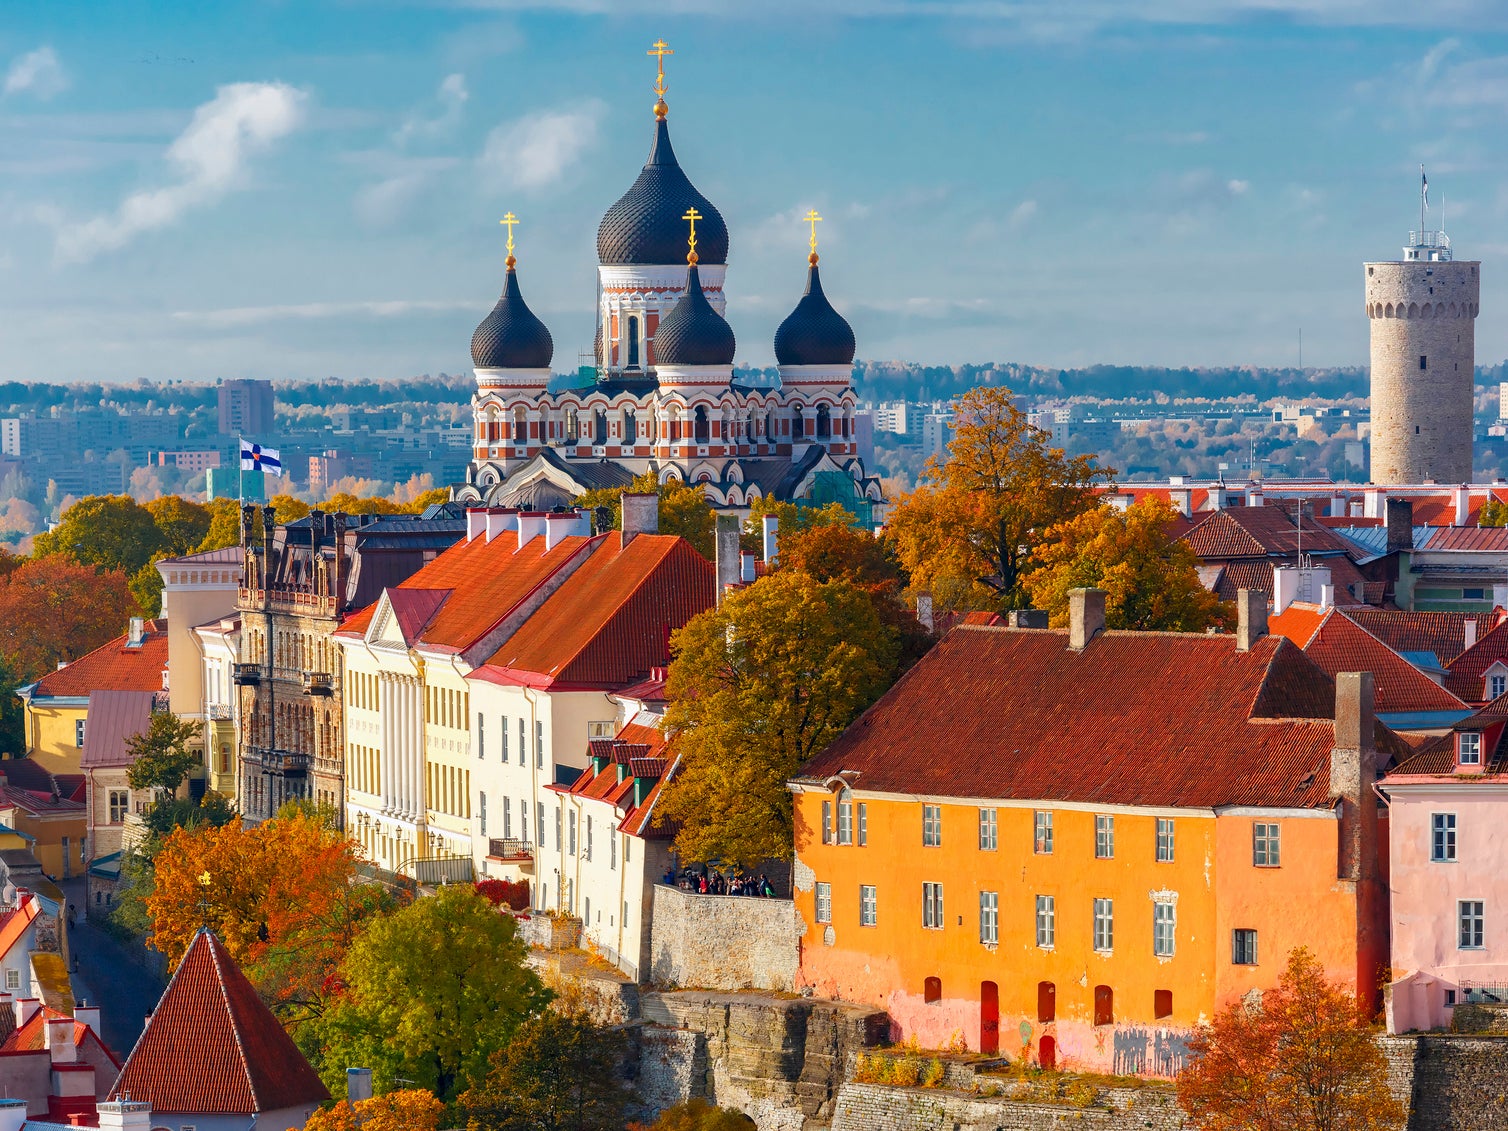 You could work remotely from Tallinn, Estonia